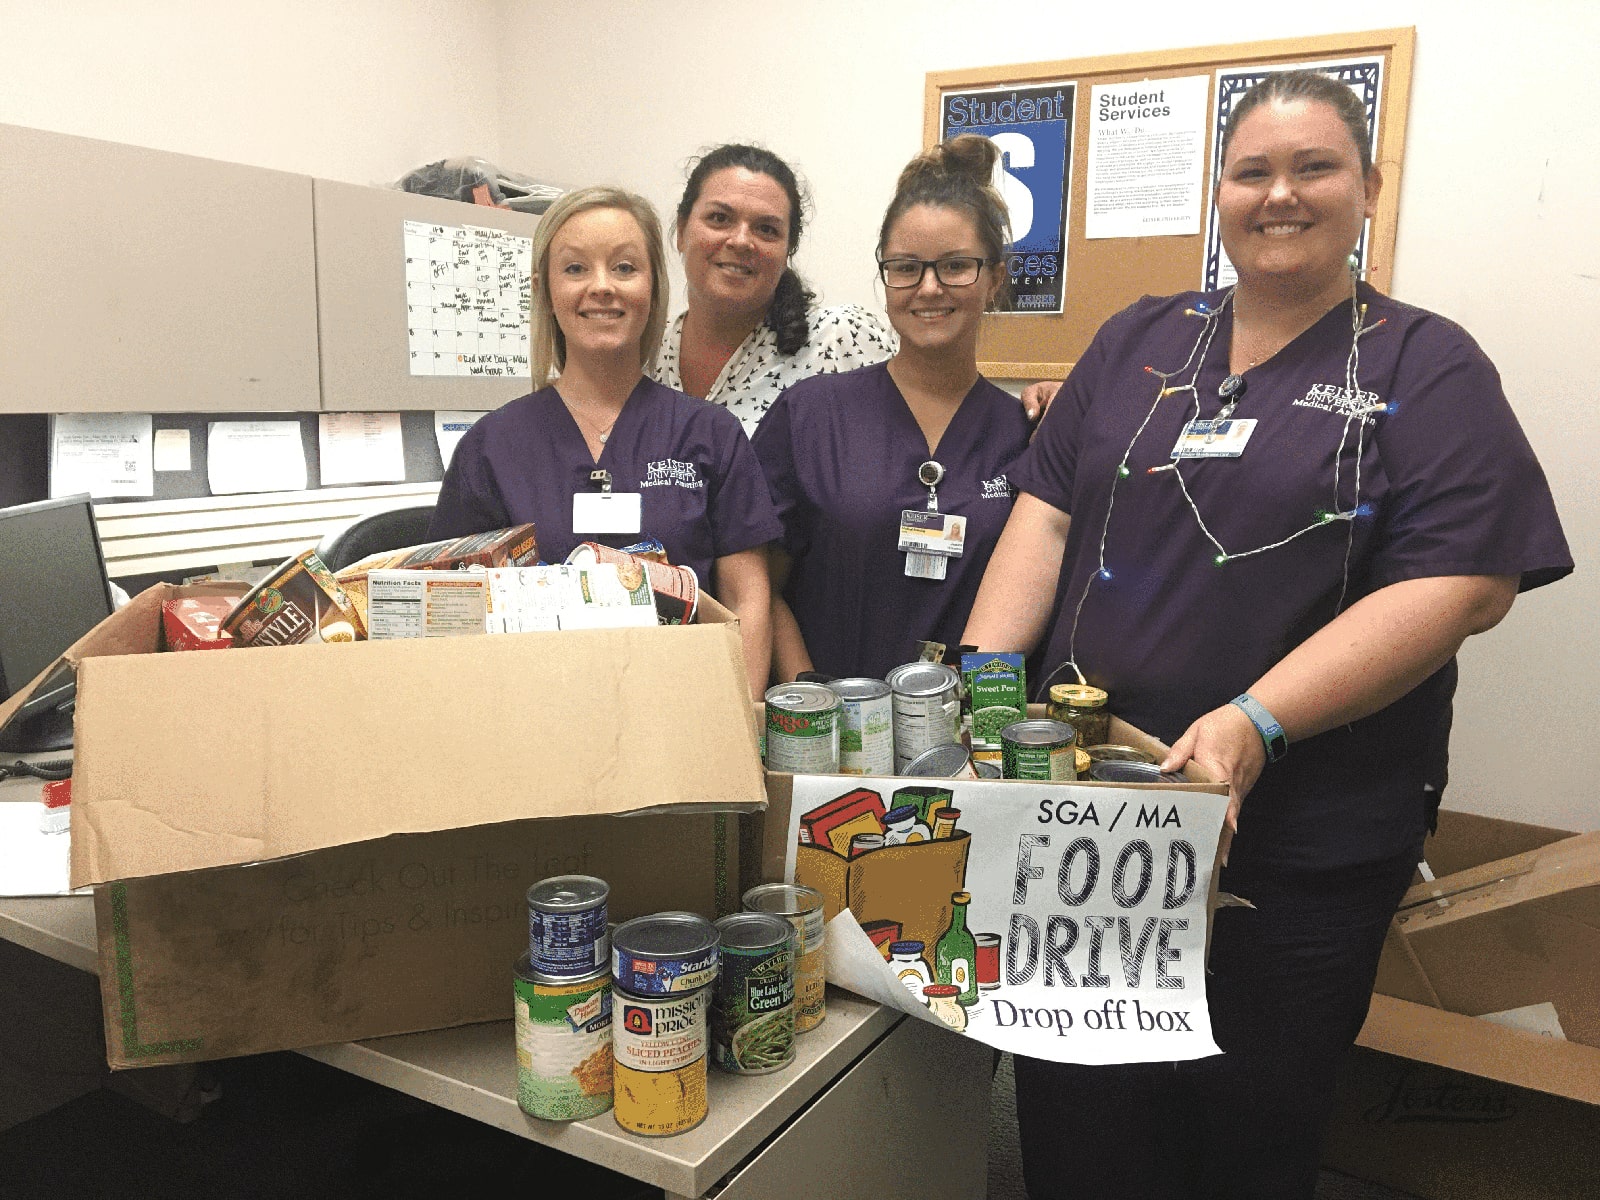 Tampa’s SGA & MA Students Hold a Canned Food Drive